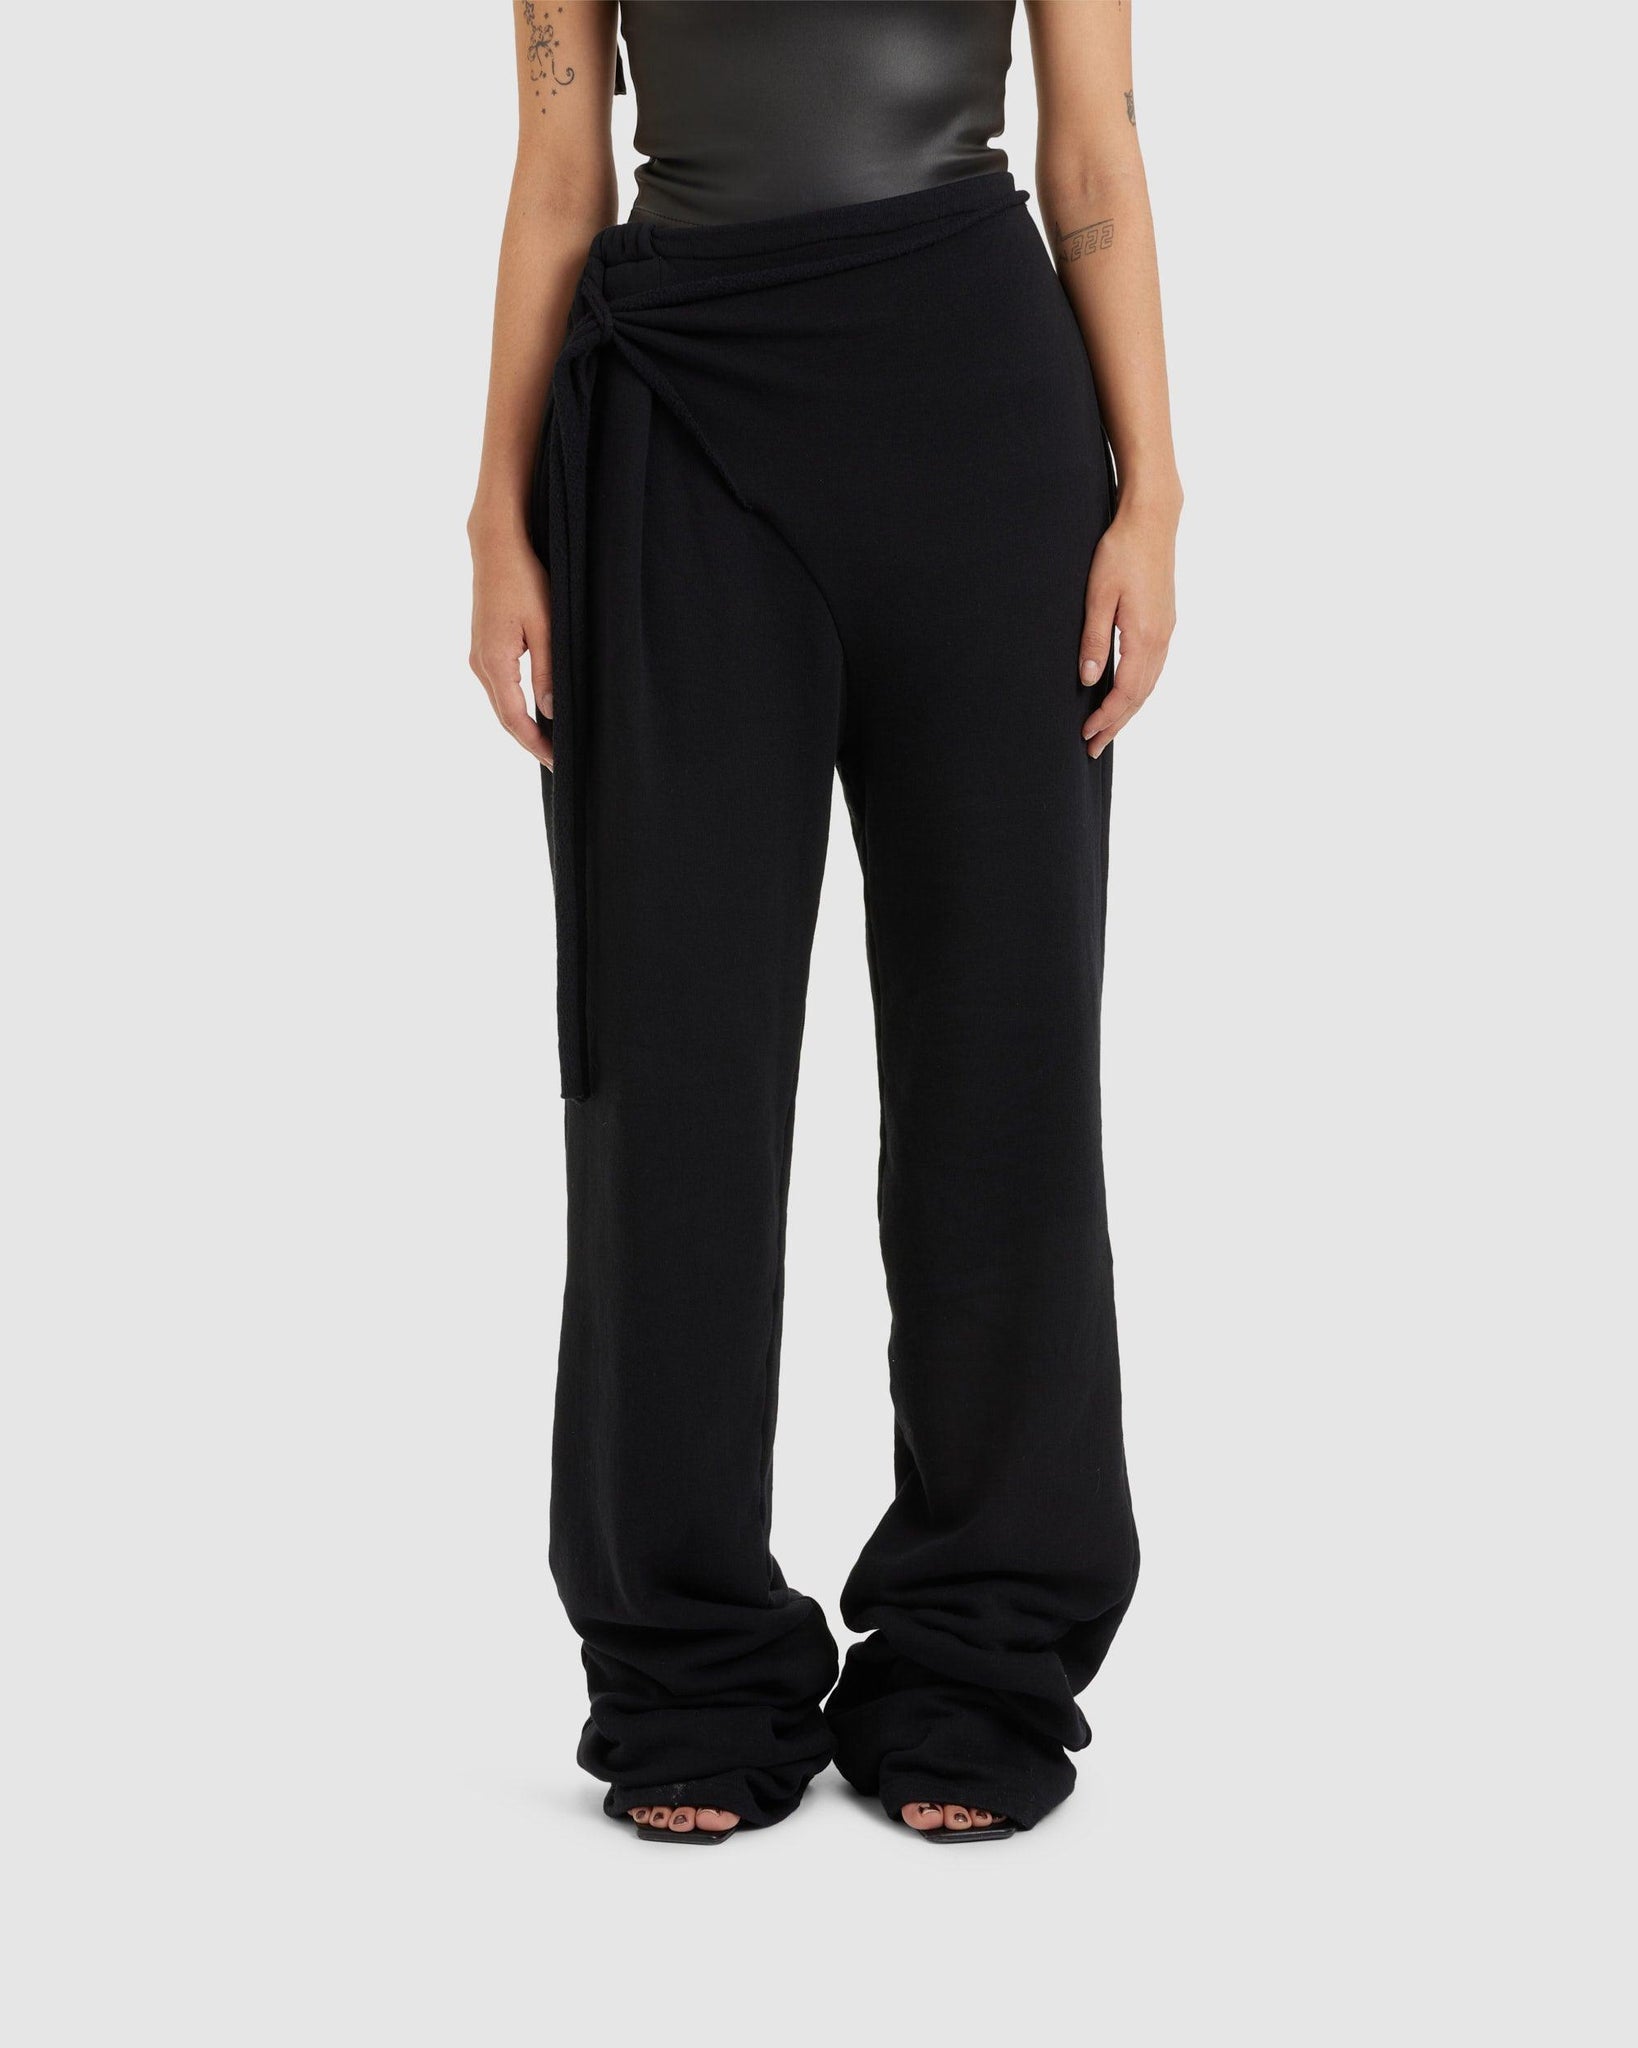 Otto Sweatpants - {{ collection.title }} - Chinatown Country Club 